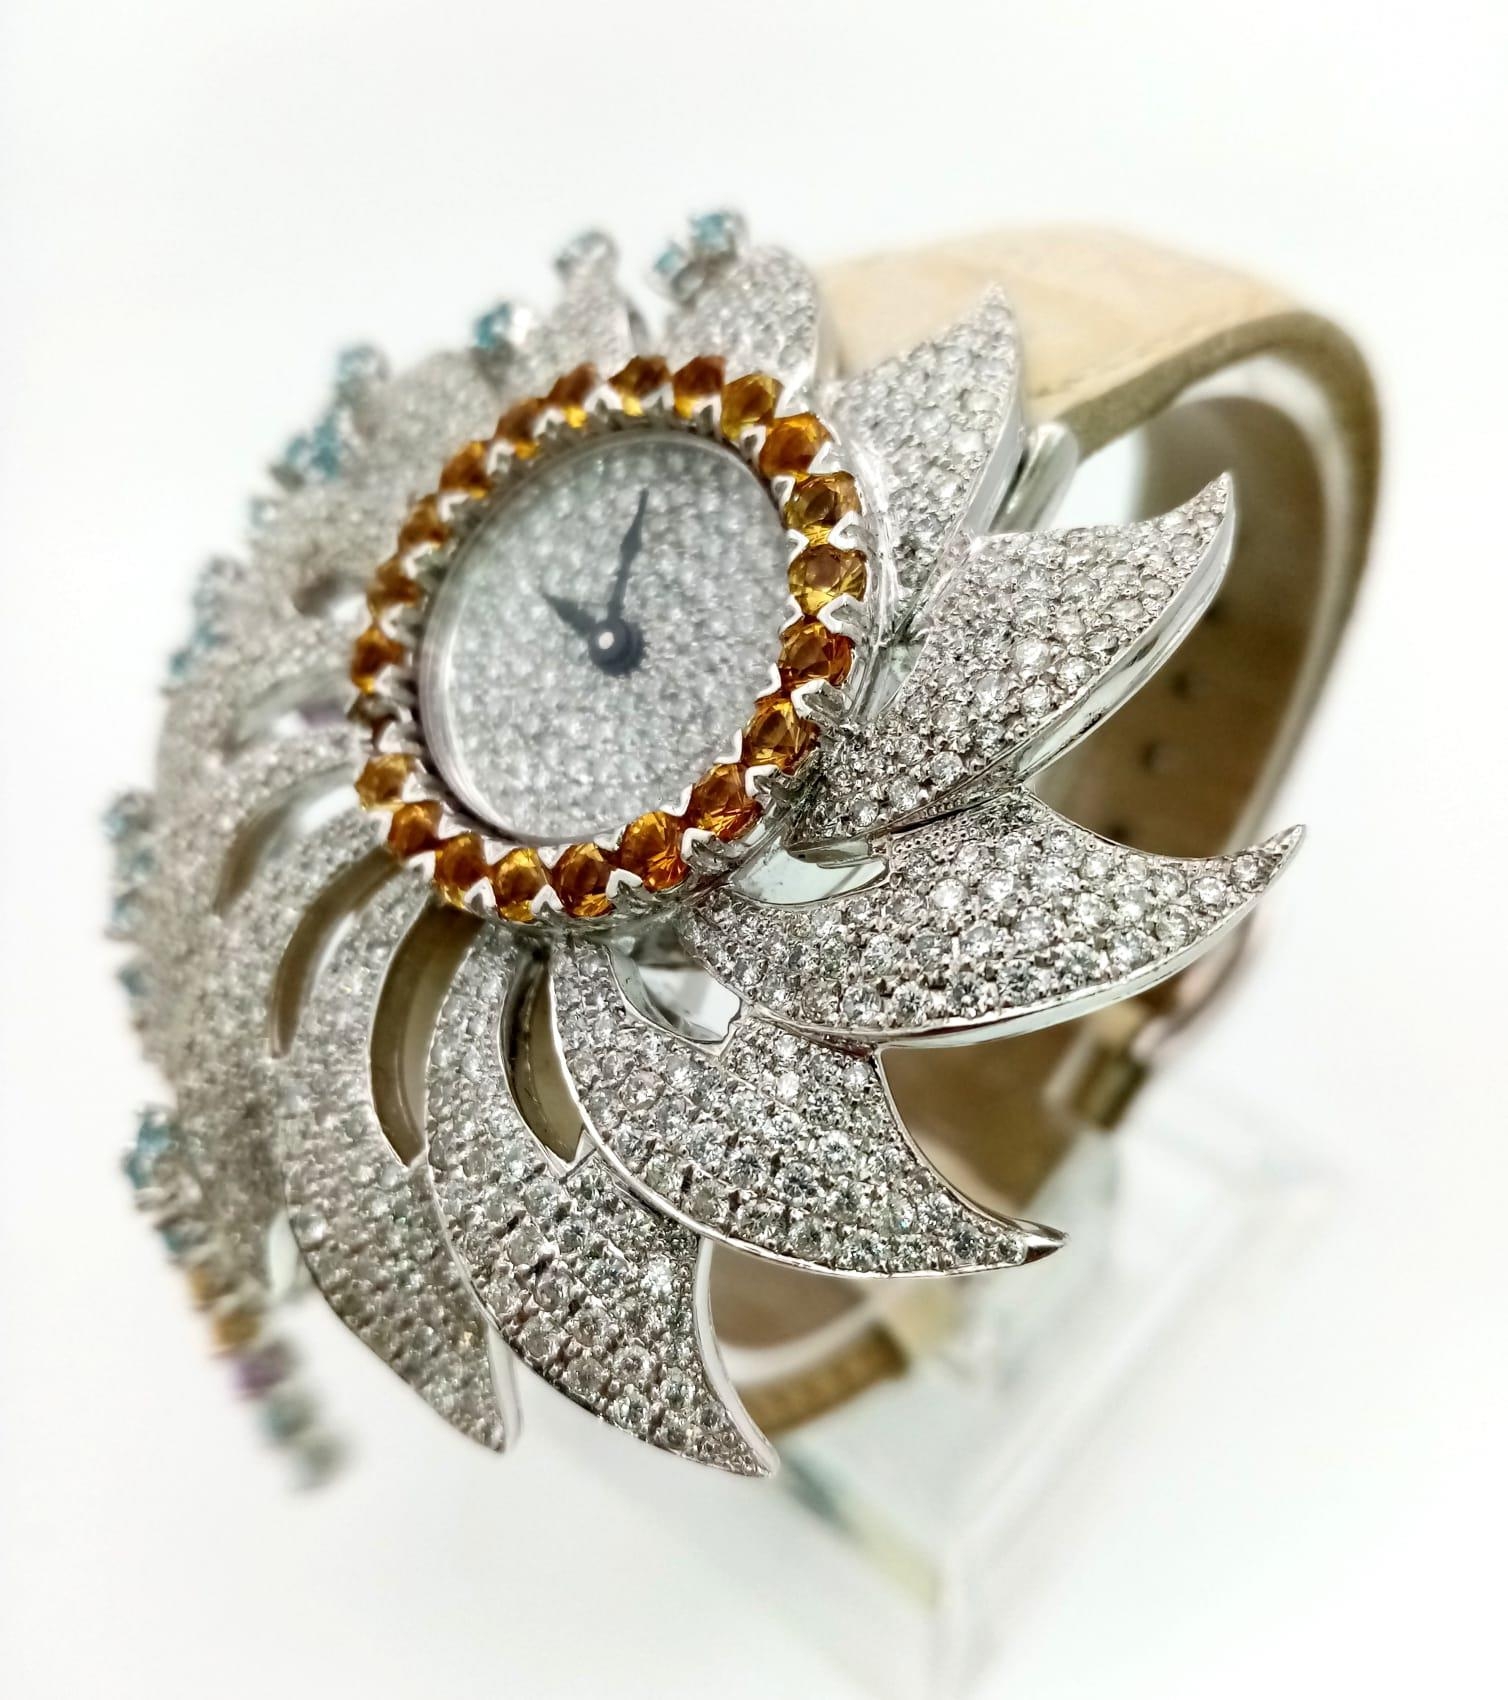 AN 18K WHITE GOLD AND DIAMOND DRESS WATCH BY COBRA , DIAMOND RAYS AND BEZEL. ONE SMALL CITRINE - Image 3 of 4